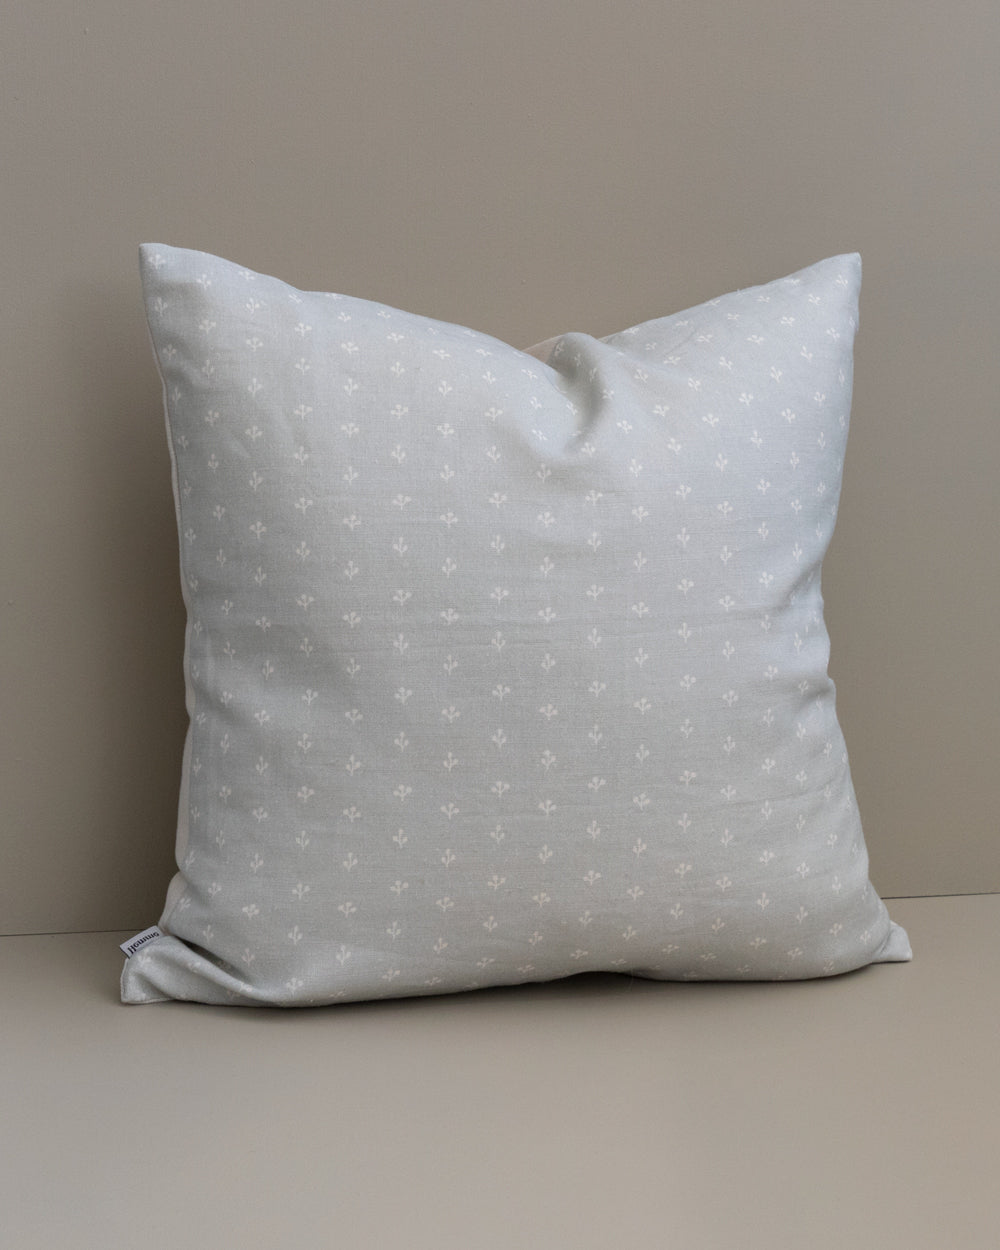 14 x 14 Periwinkle Pillow Cover - Love Woolies